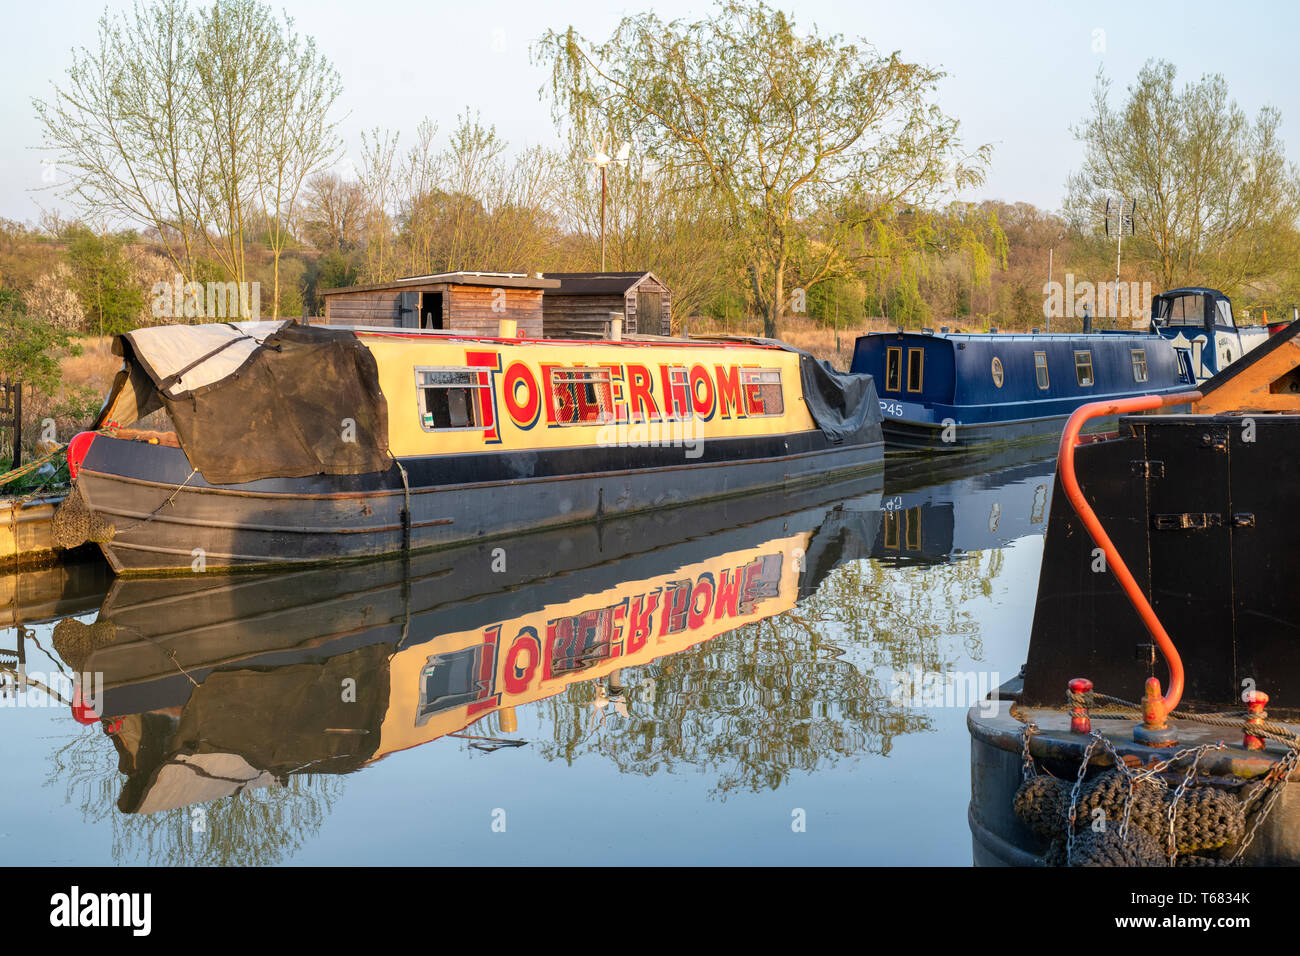 Toblerhome sign writing on a Canal boat on the oxford canal in the evening spring sunlight. Aynho Wharf, Oxfordshire, England Stock Photo